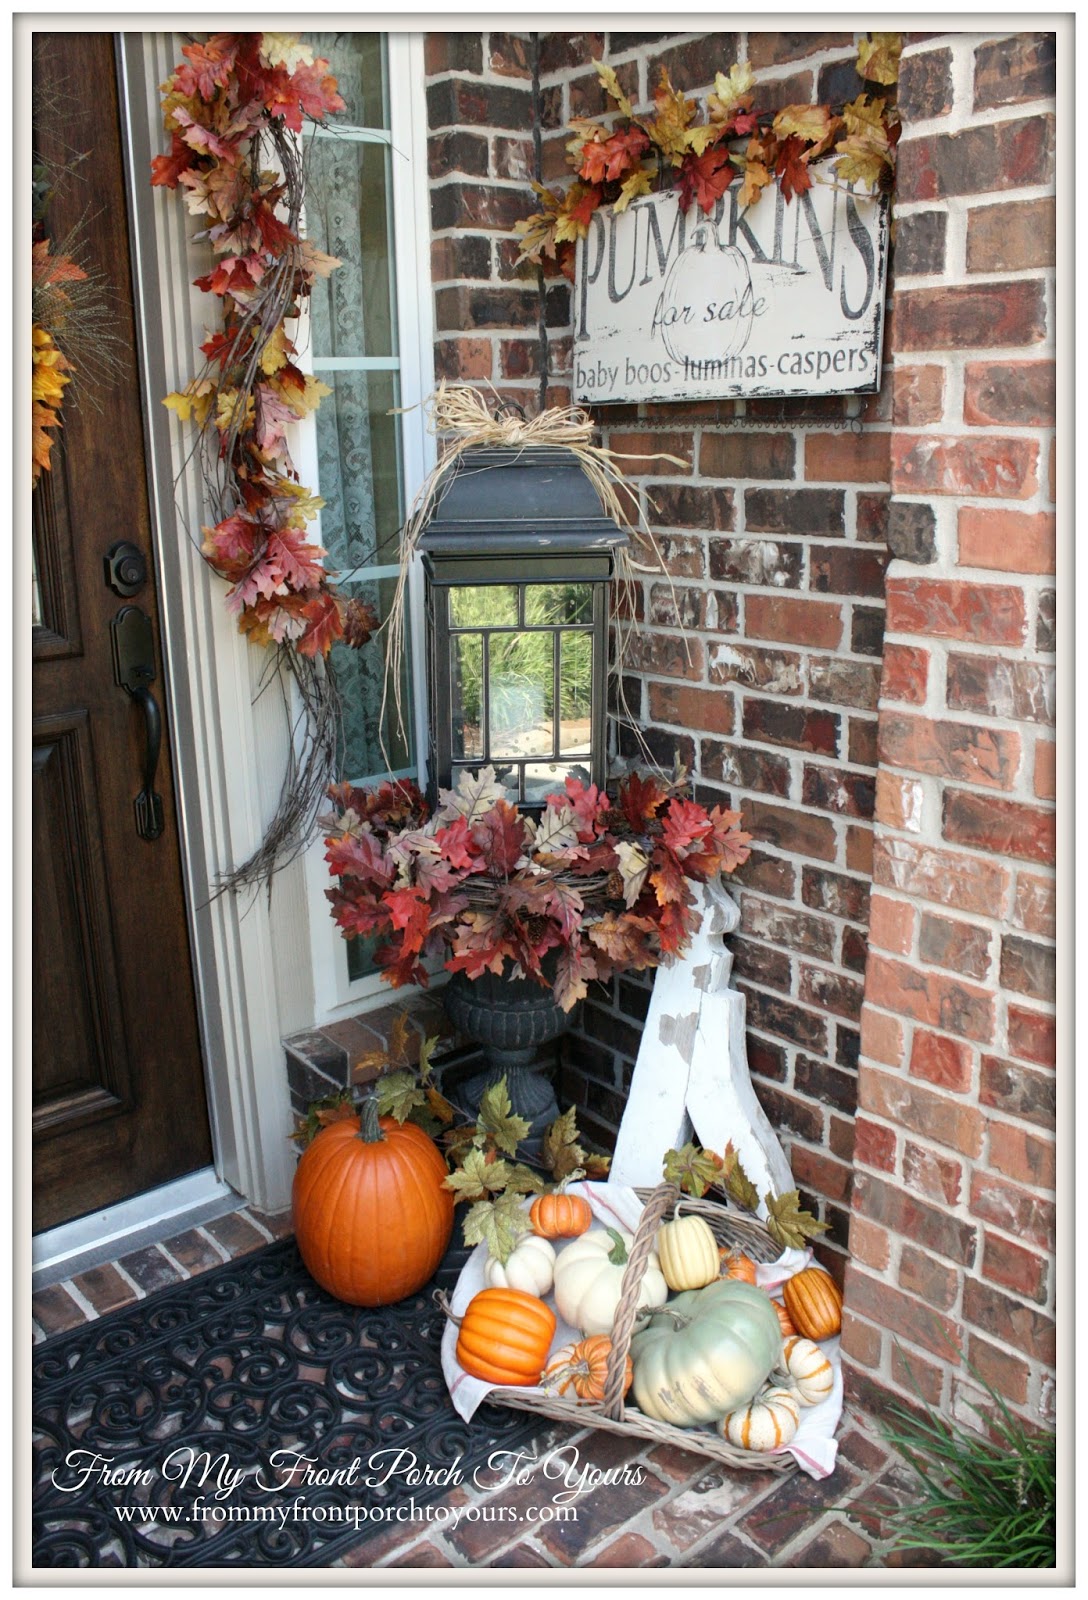 From My Front Porch To Yours- Falling For Fall Porch Party- A Fall Porch Link Up Party